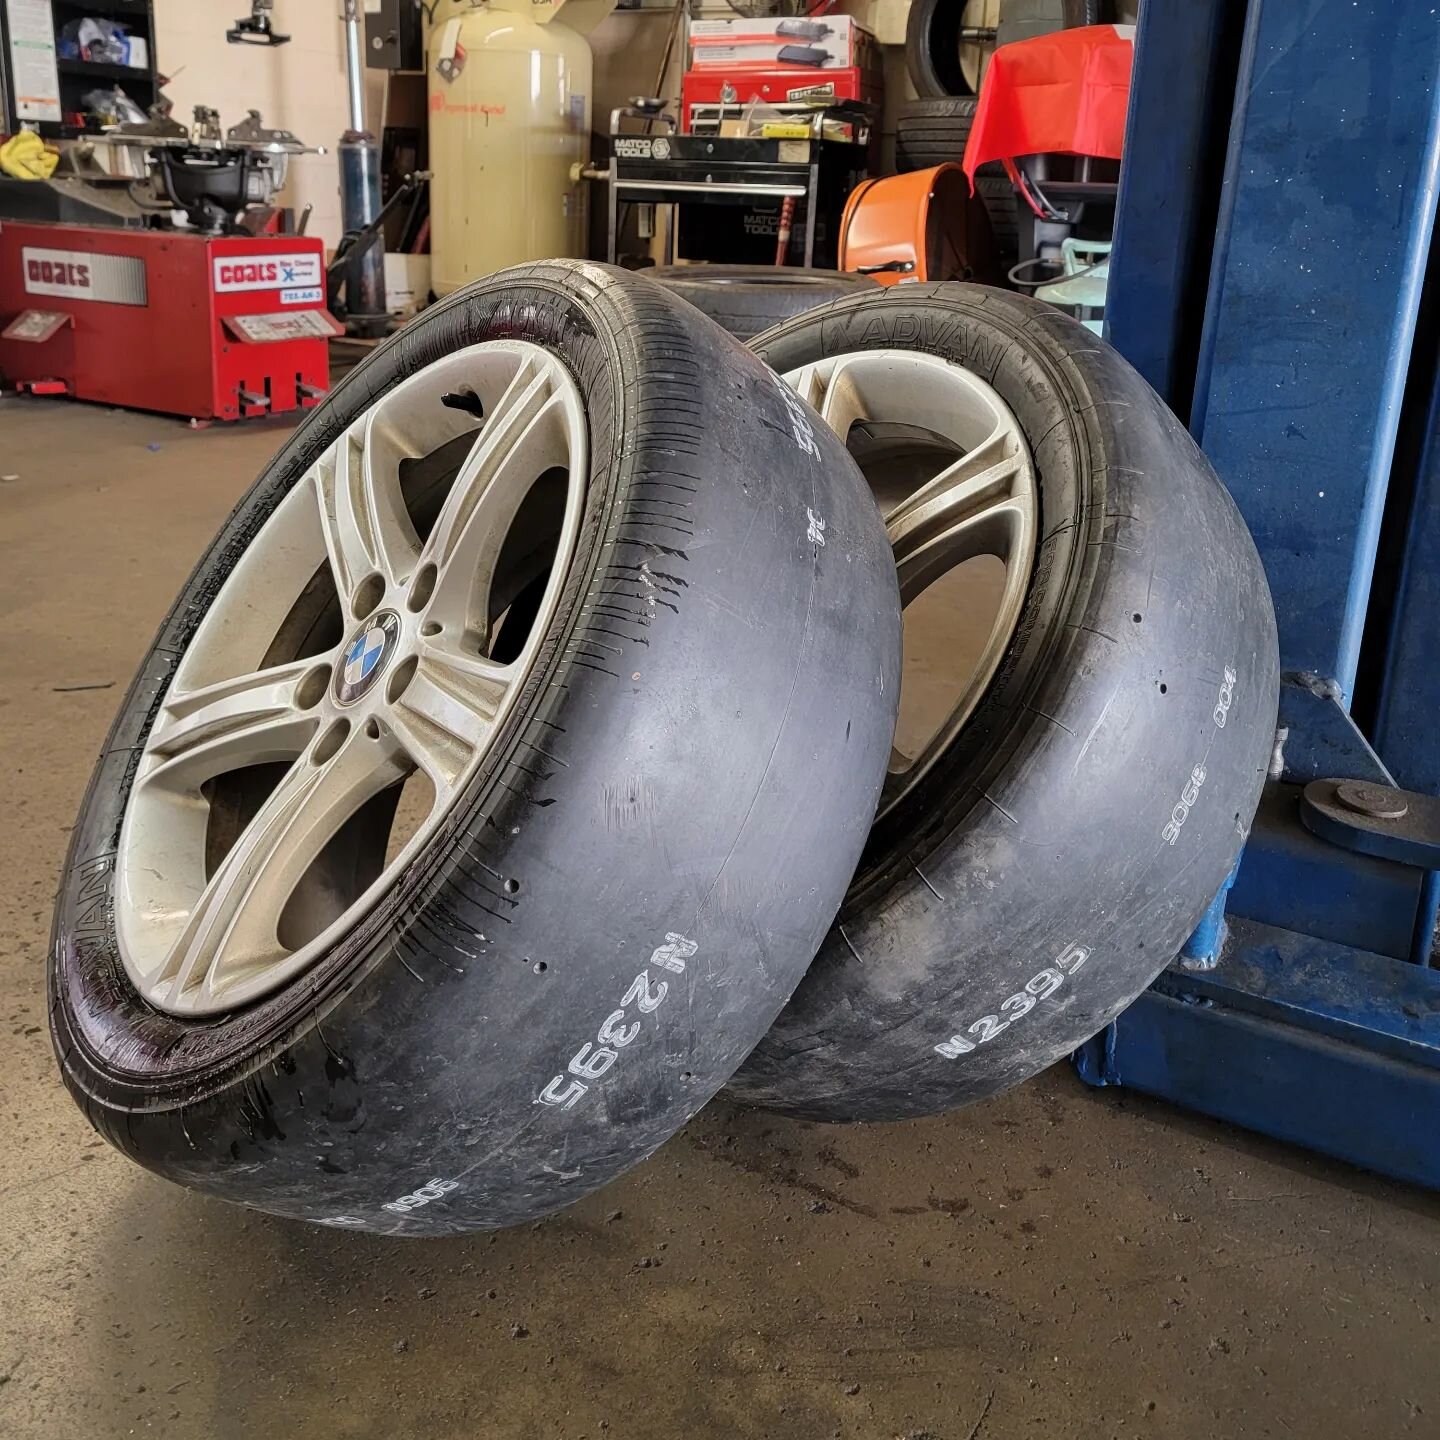 Ready for some fun times. 
.
.
.
#tiresquad #tiresquadwestminster #slicks #slicktires #racing